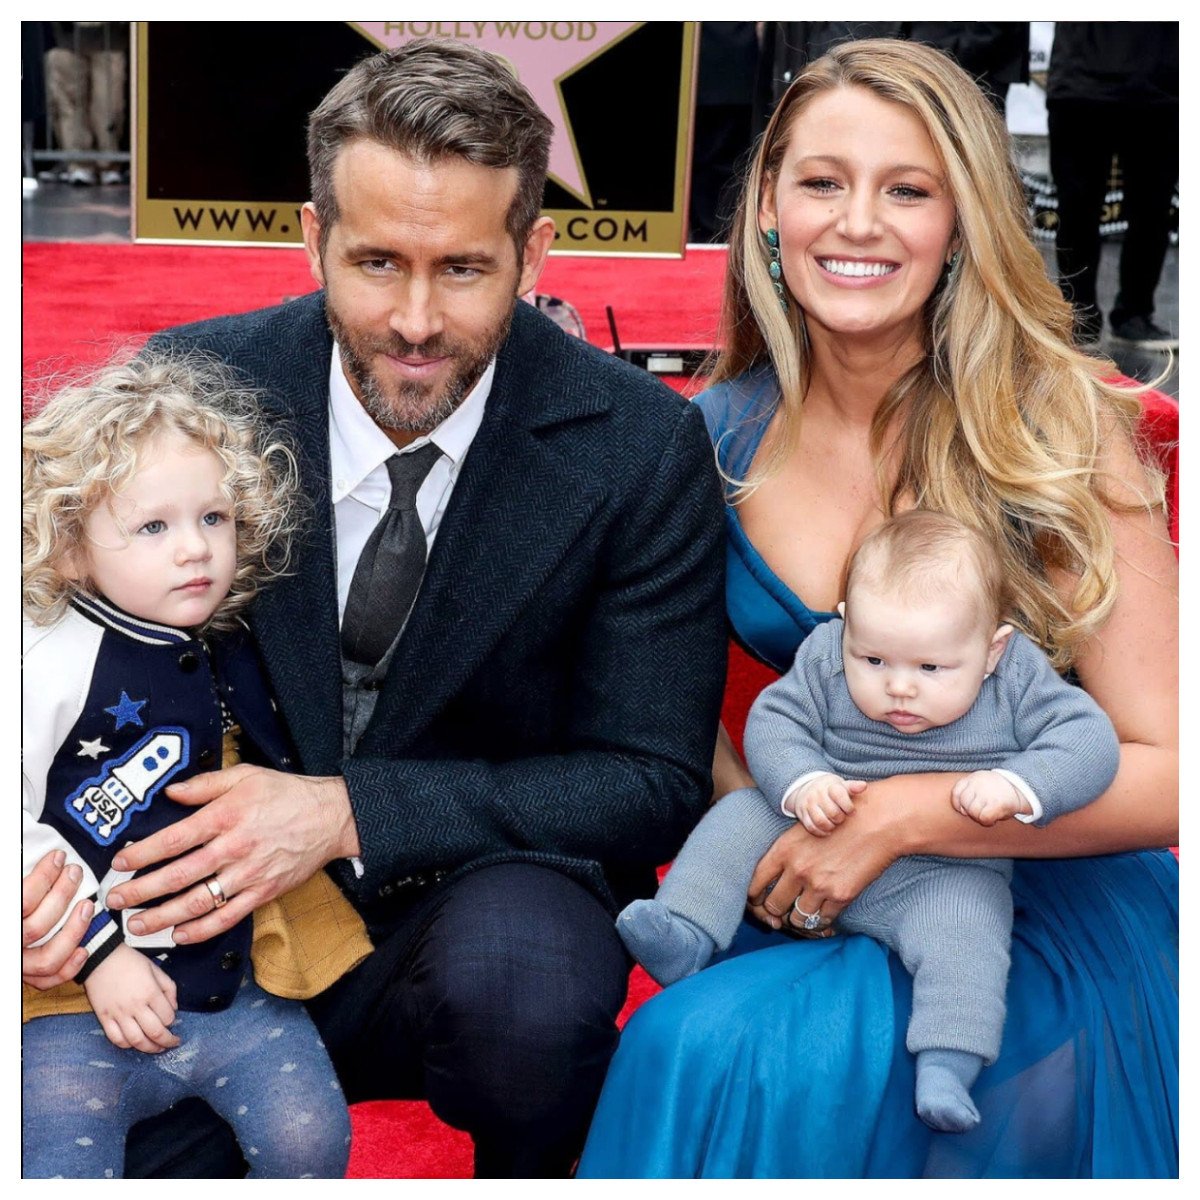 How Blake Lively and Ryan Reynolds are raising their 4 kids: the